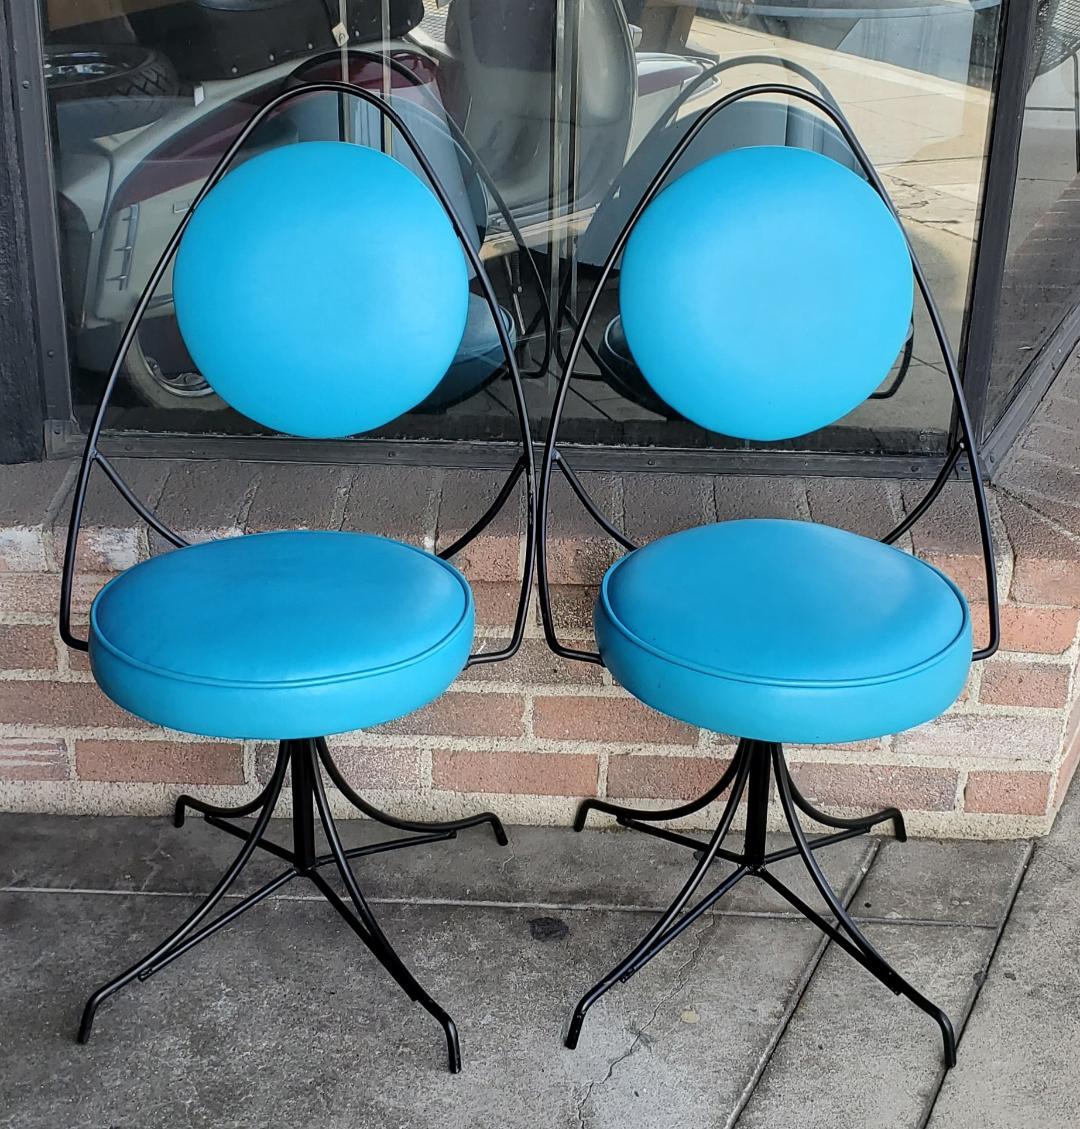 1950s Black and Blue Swivel Side Chairs Styled After John Risley - Set of 2 For Sale 12